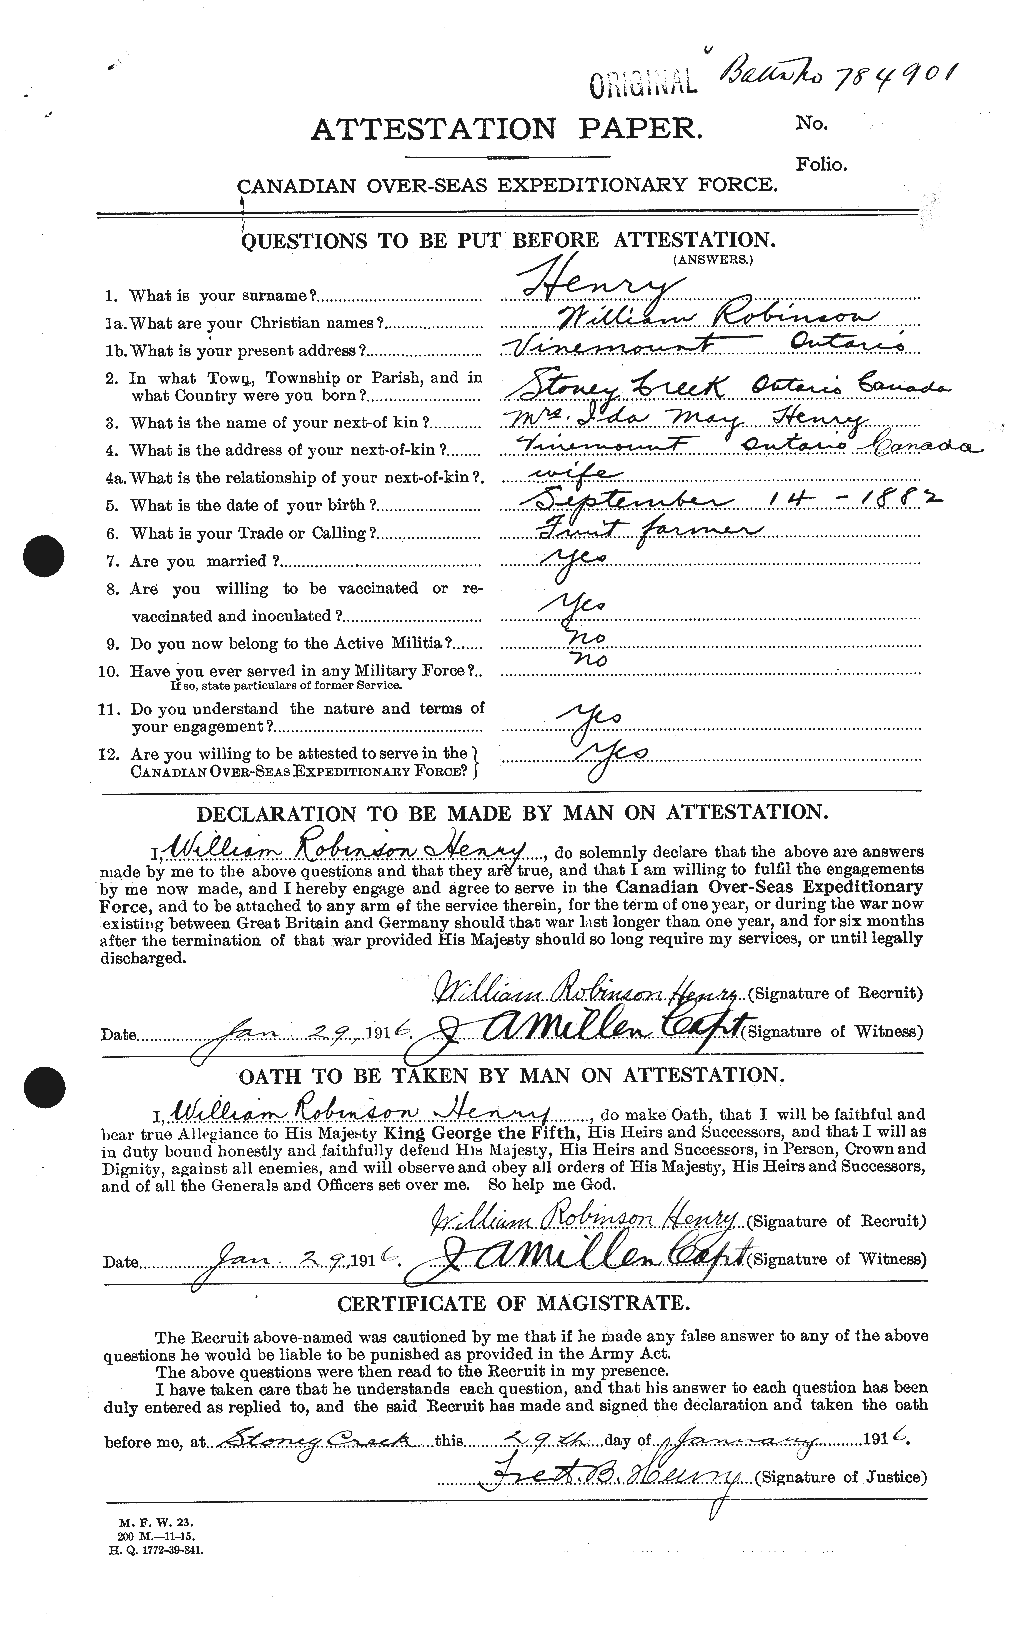 Personnel Records of the First World War - CEF 387797a